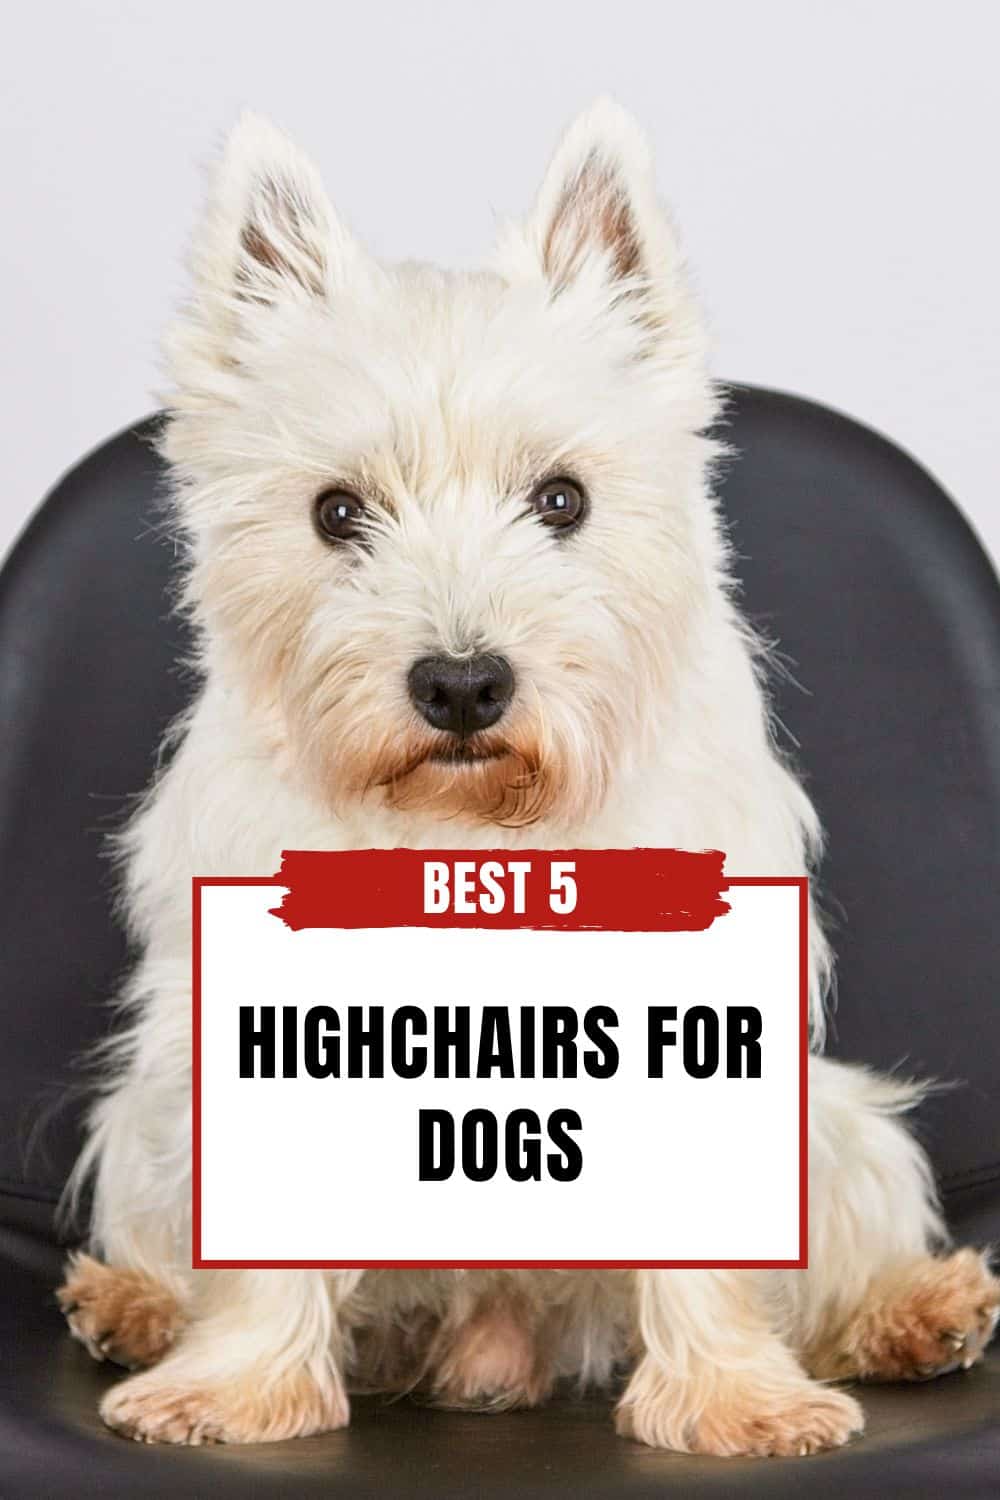 The Best 5 Highchairs For Dogs PIN 